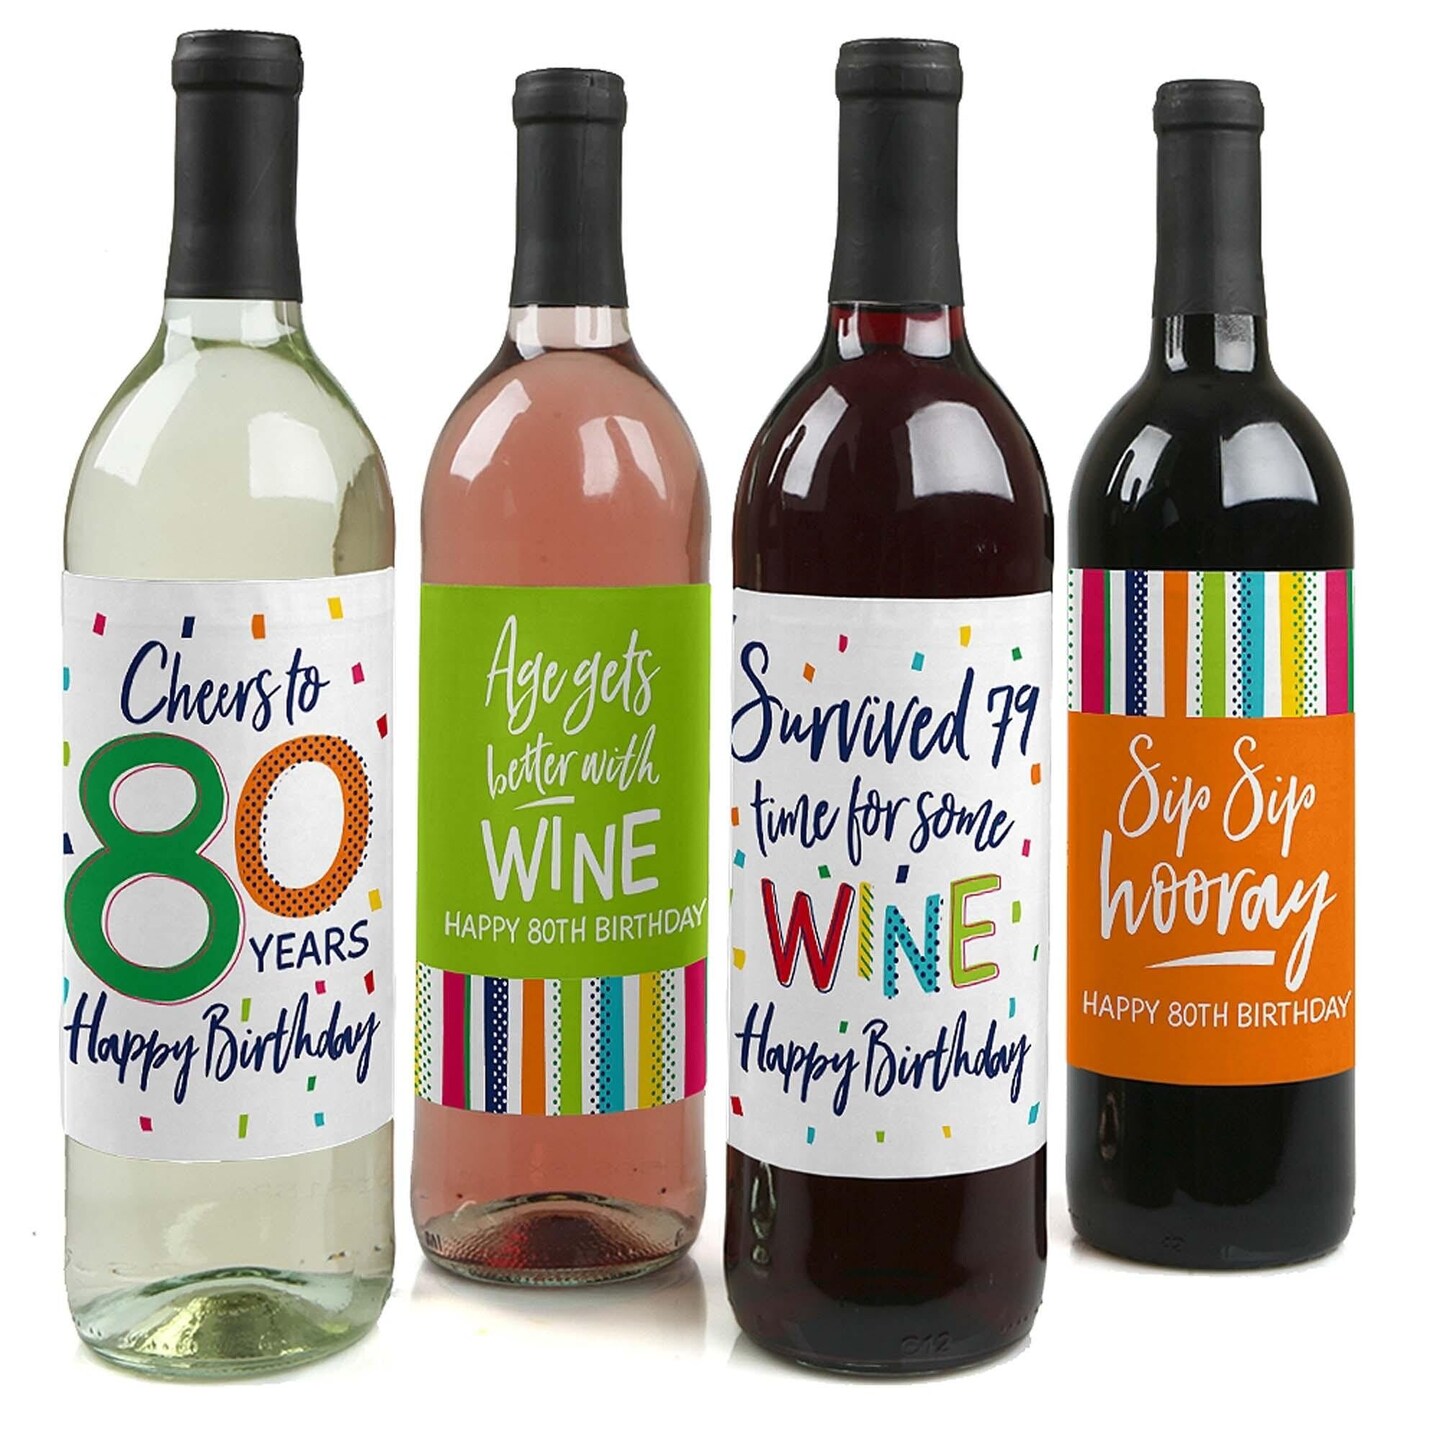 Big Dot of Happiness 80th Birthday - Cheerful Happy Birthday - Colorful Eightieth Birthday Party Decor - Wine Bottle Label Stickers - Set of 4